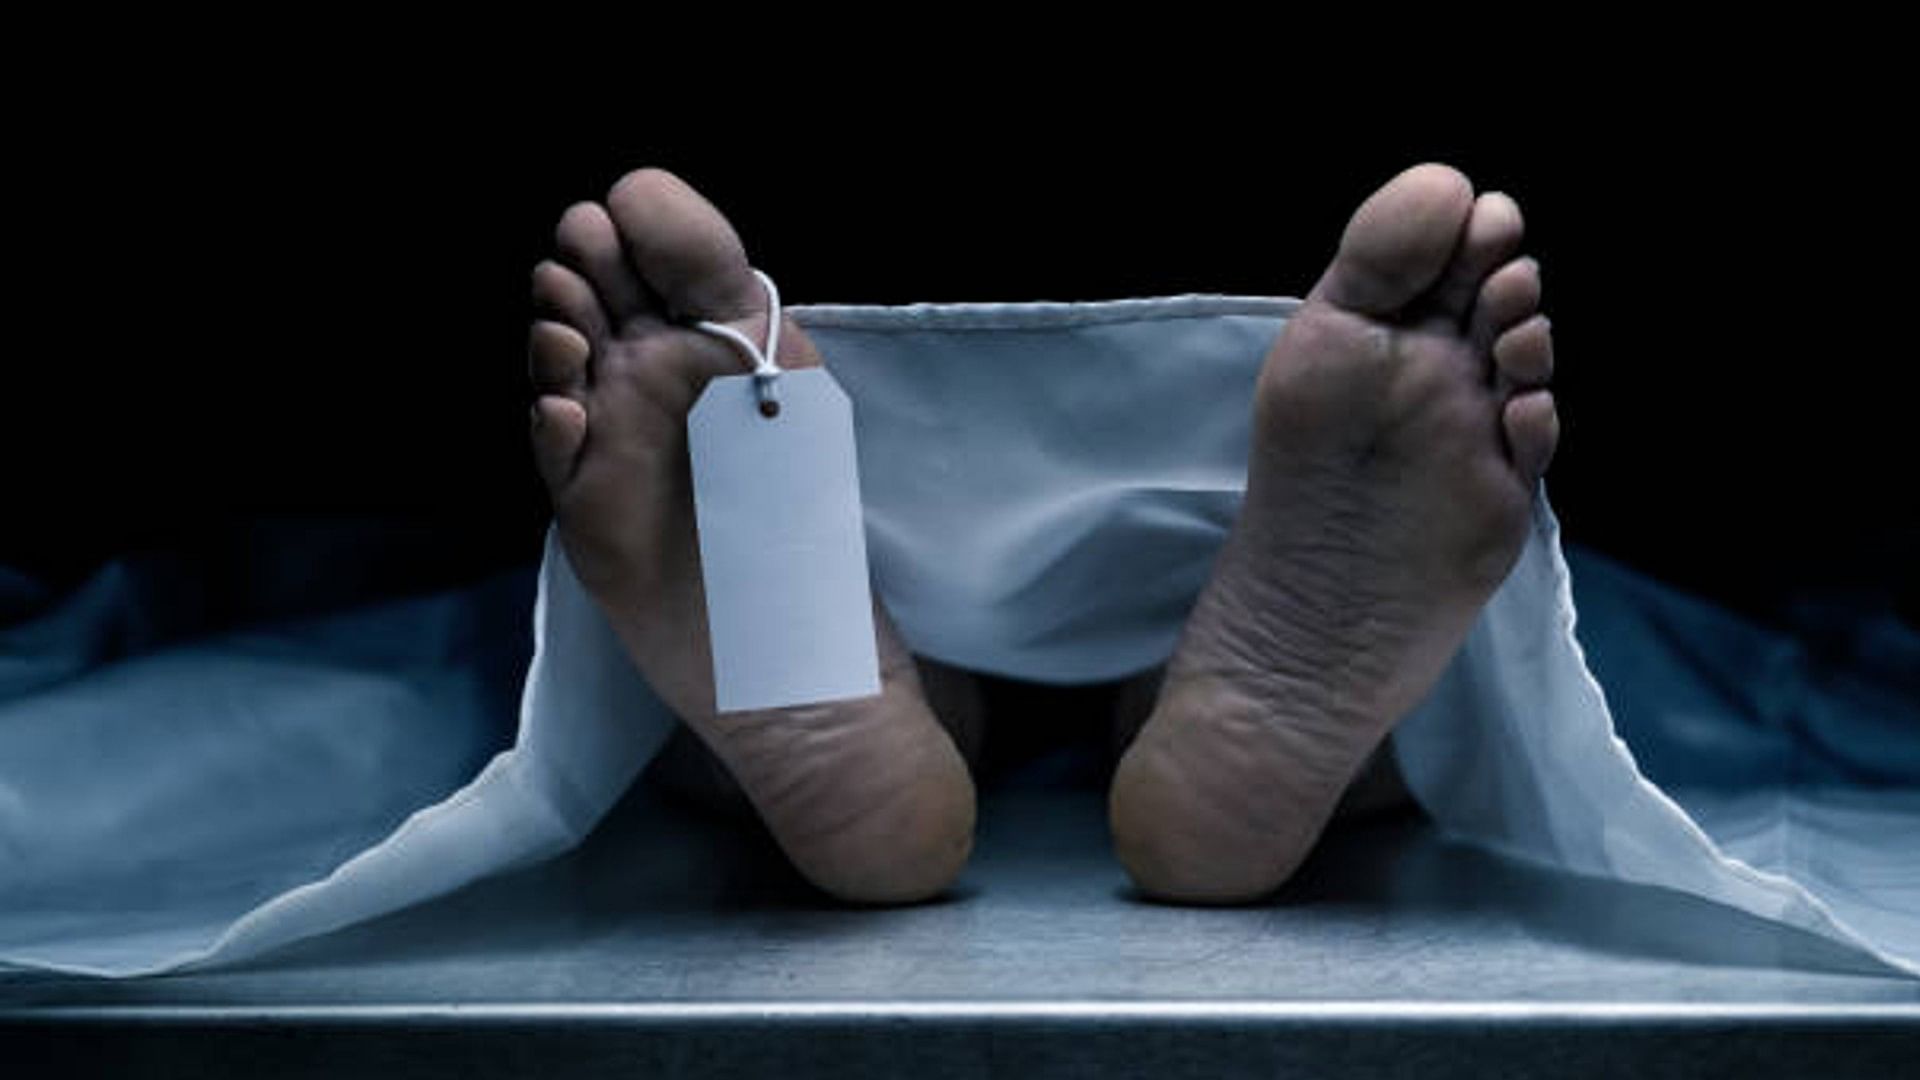 Viral News dead man became alive before being cremated corpse in china Putuo